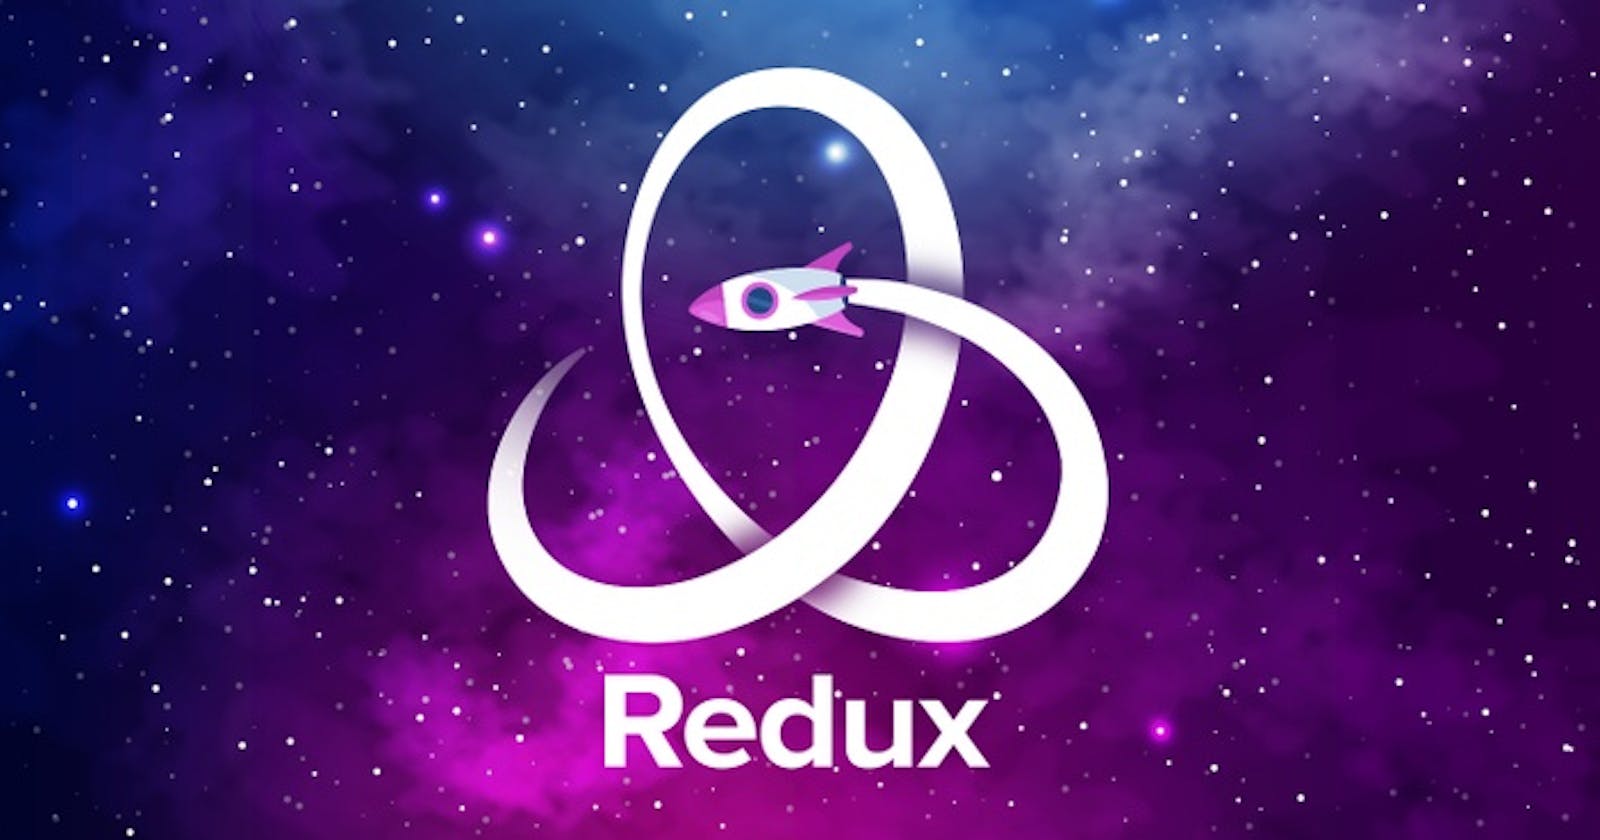 Redux Simplified: A Beginner’s Guide to the Core Concepts of Redux